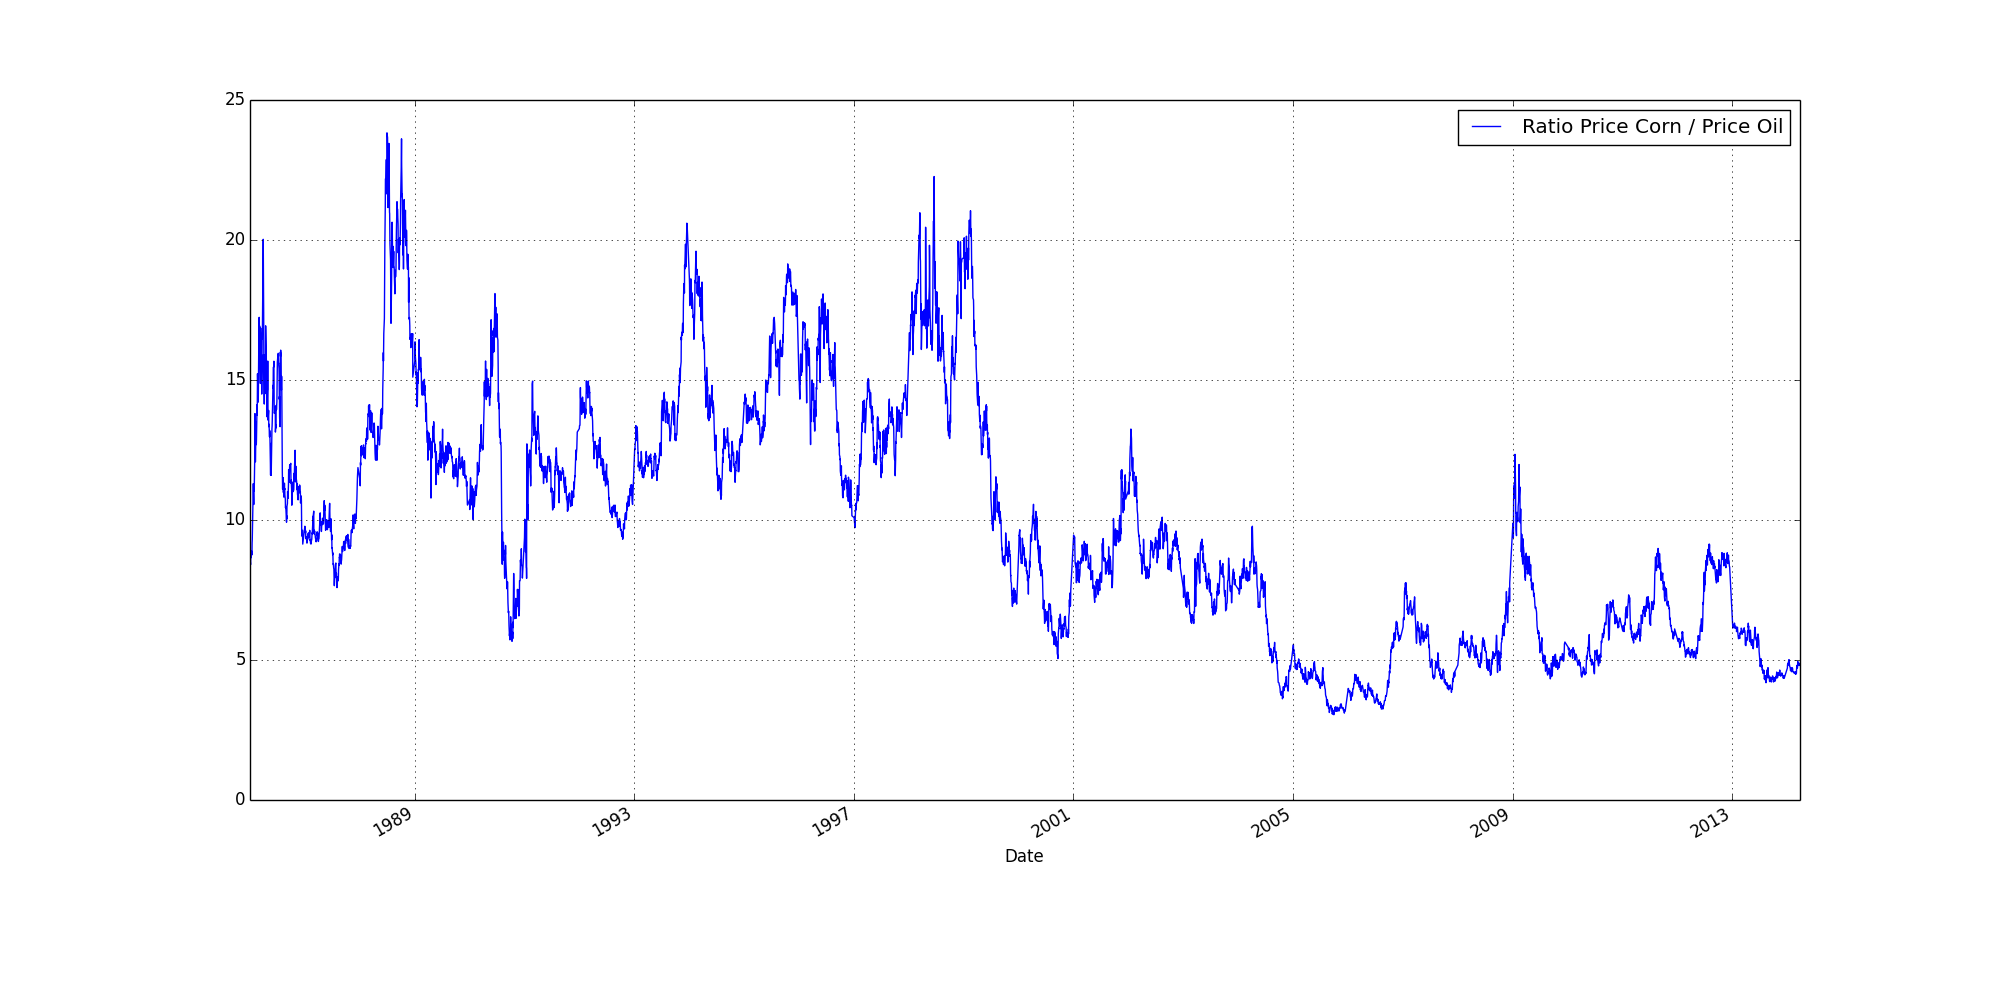 Corn divided by Oil a Ratio of Price over Time